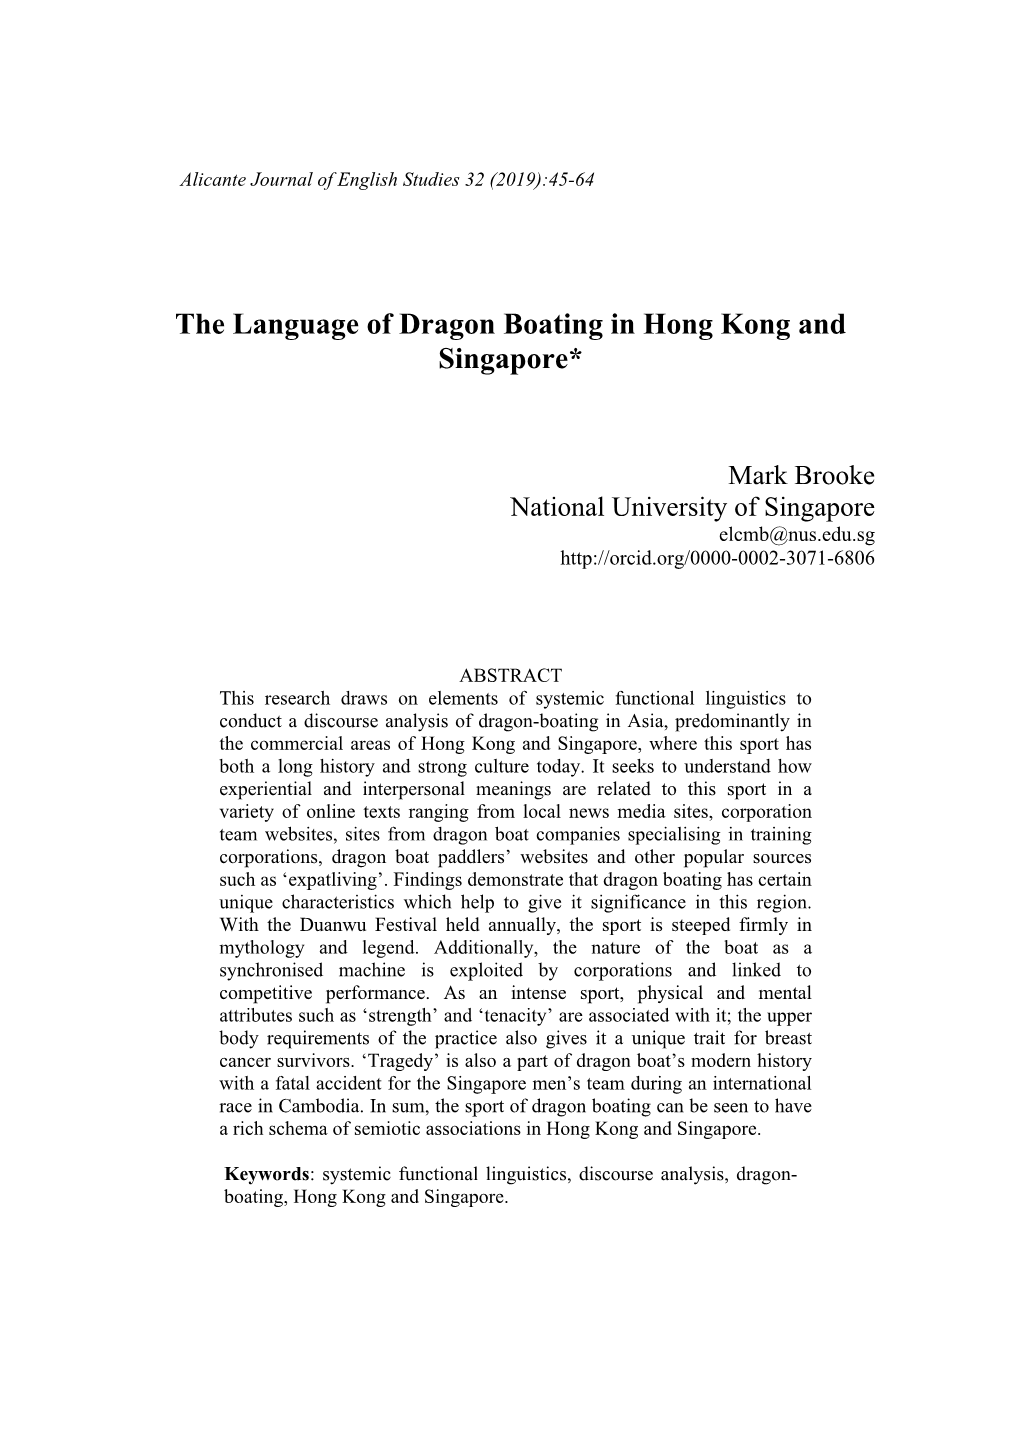 The Language of Dragon Boating in Hong Kong and Singapore*